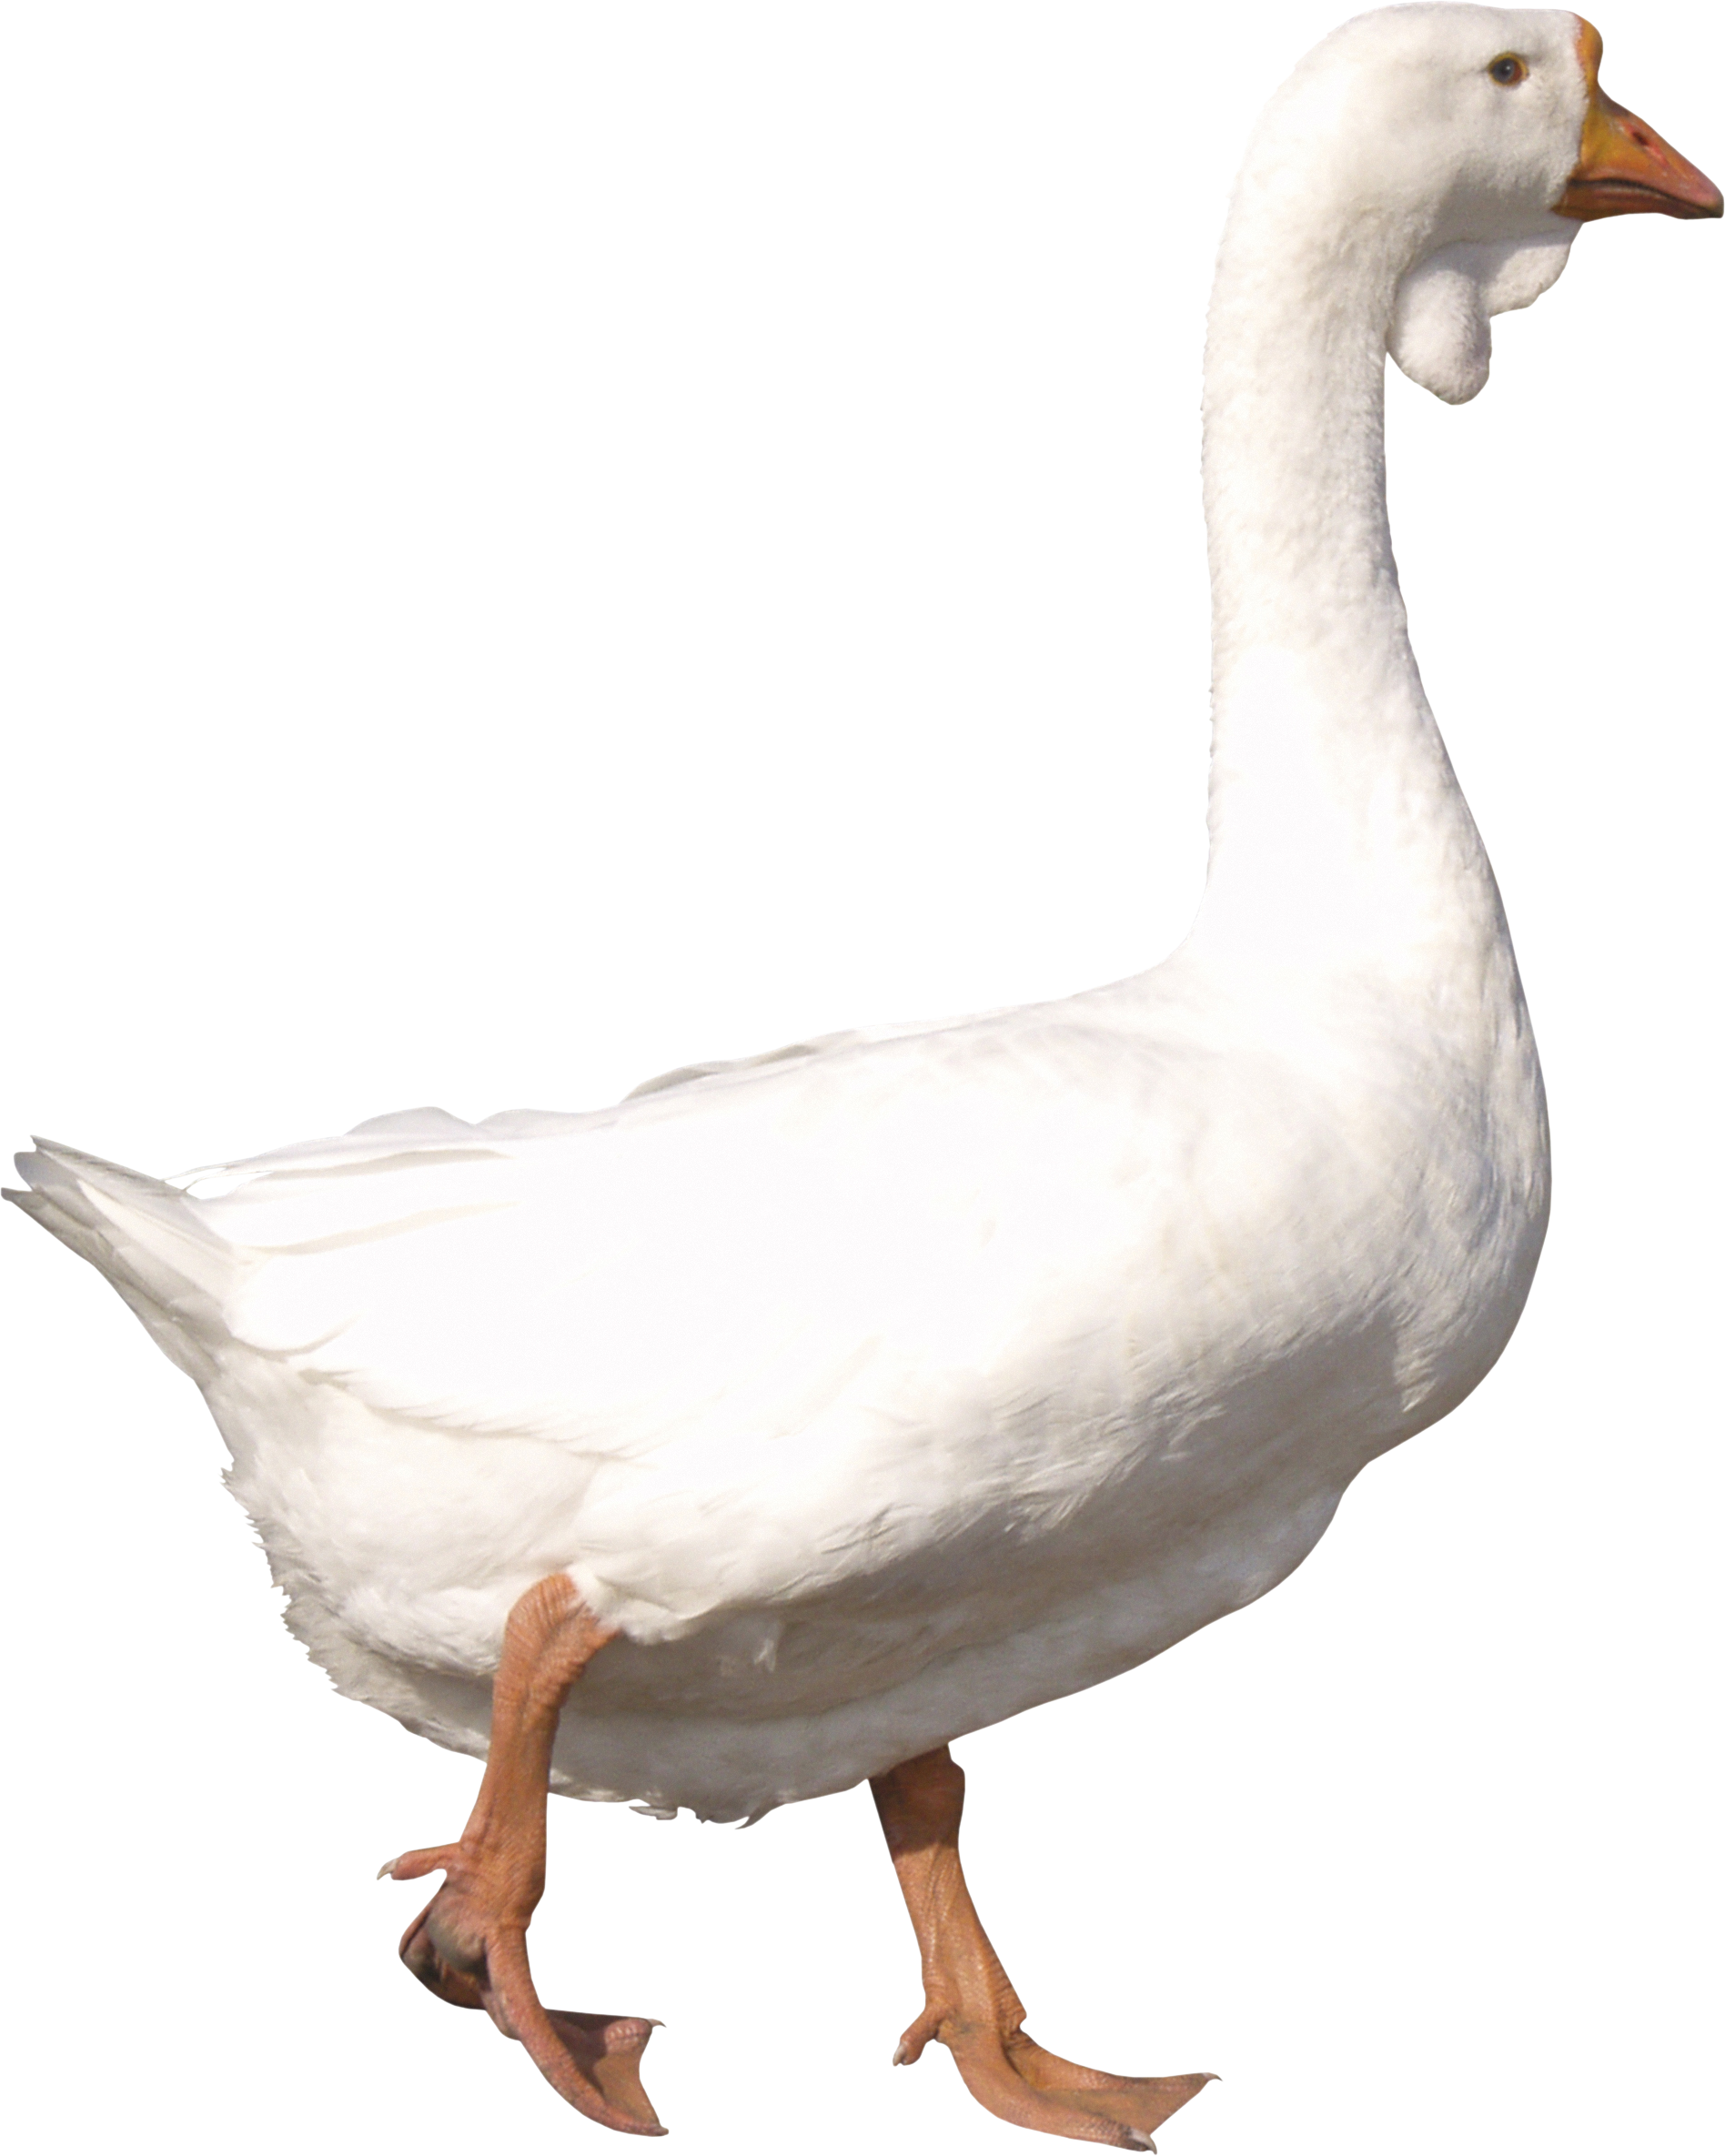 Duck png image free. Duckling clipart swan